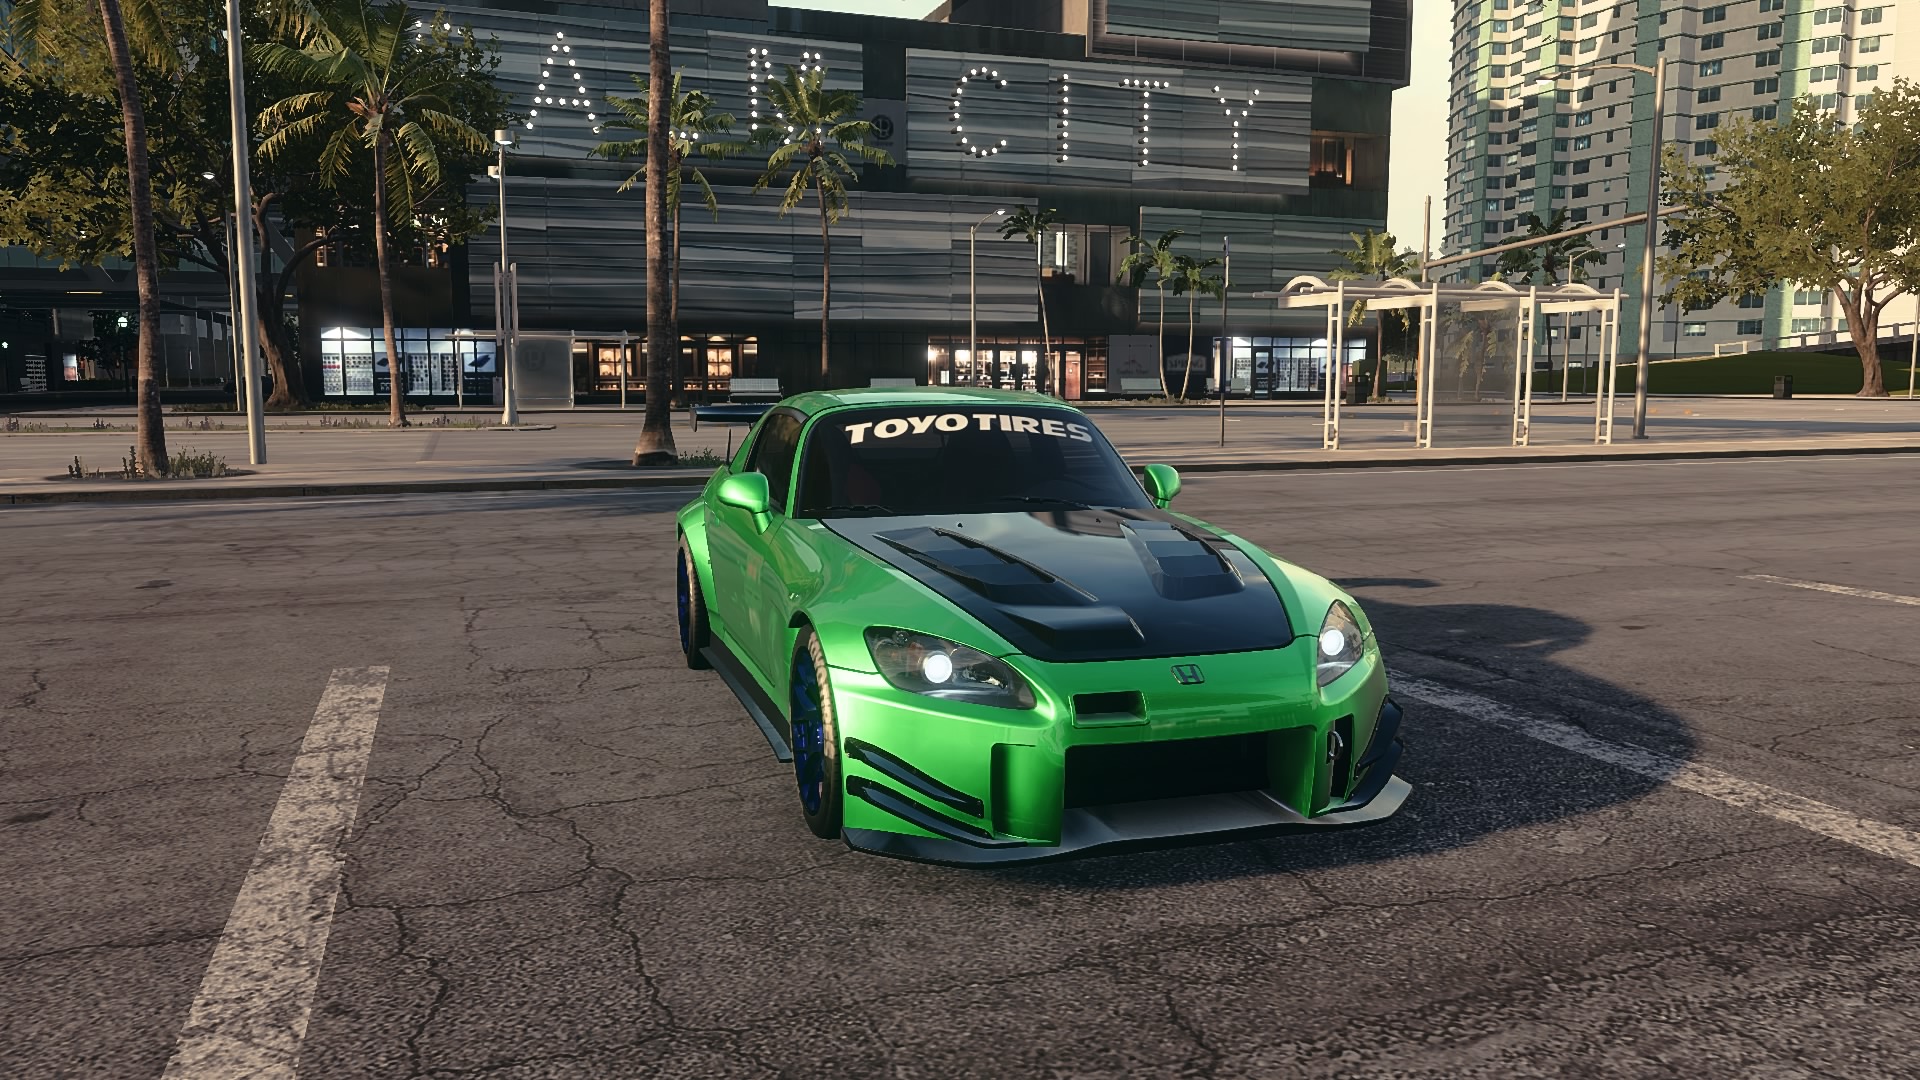 General 1920x1080 car Honda S2000 Need for Speed: Heat green Toyo Tires PlayStation 4 video games frontal view video game art screen shot headlights palm trees building city CGI parking lot vehicle sunlight